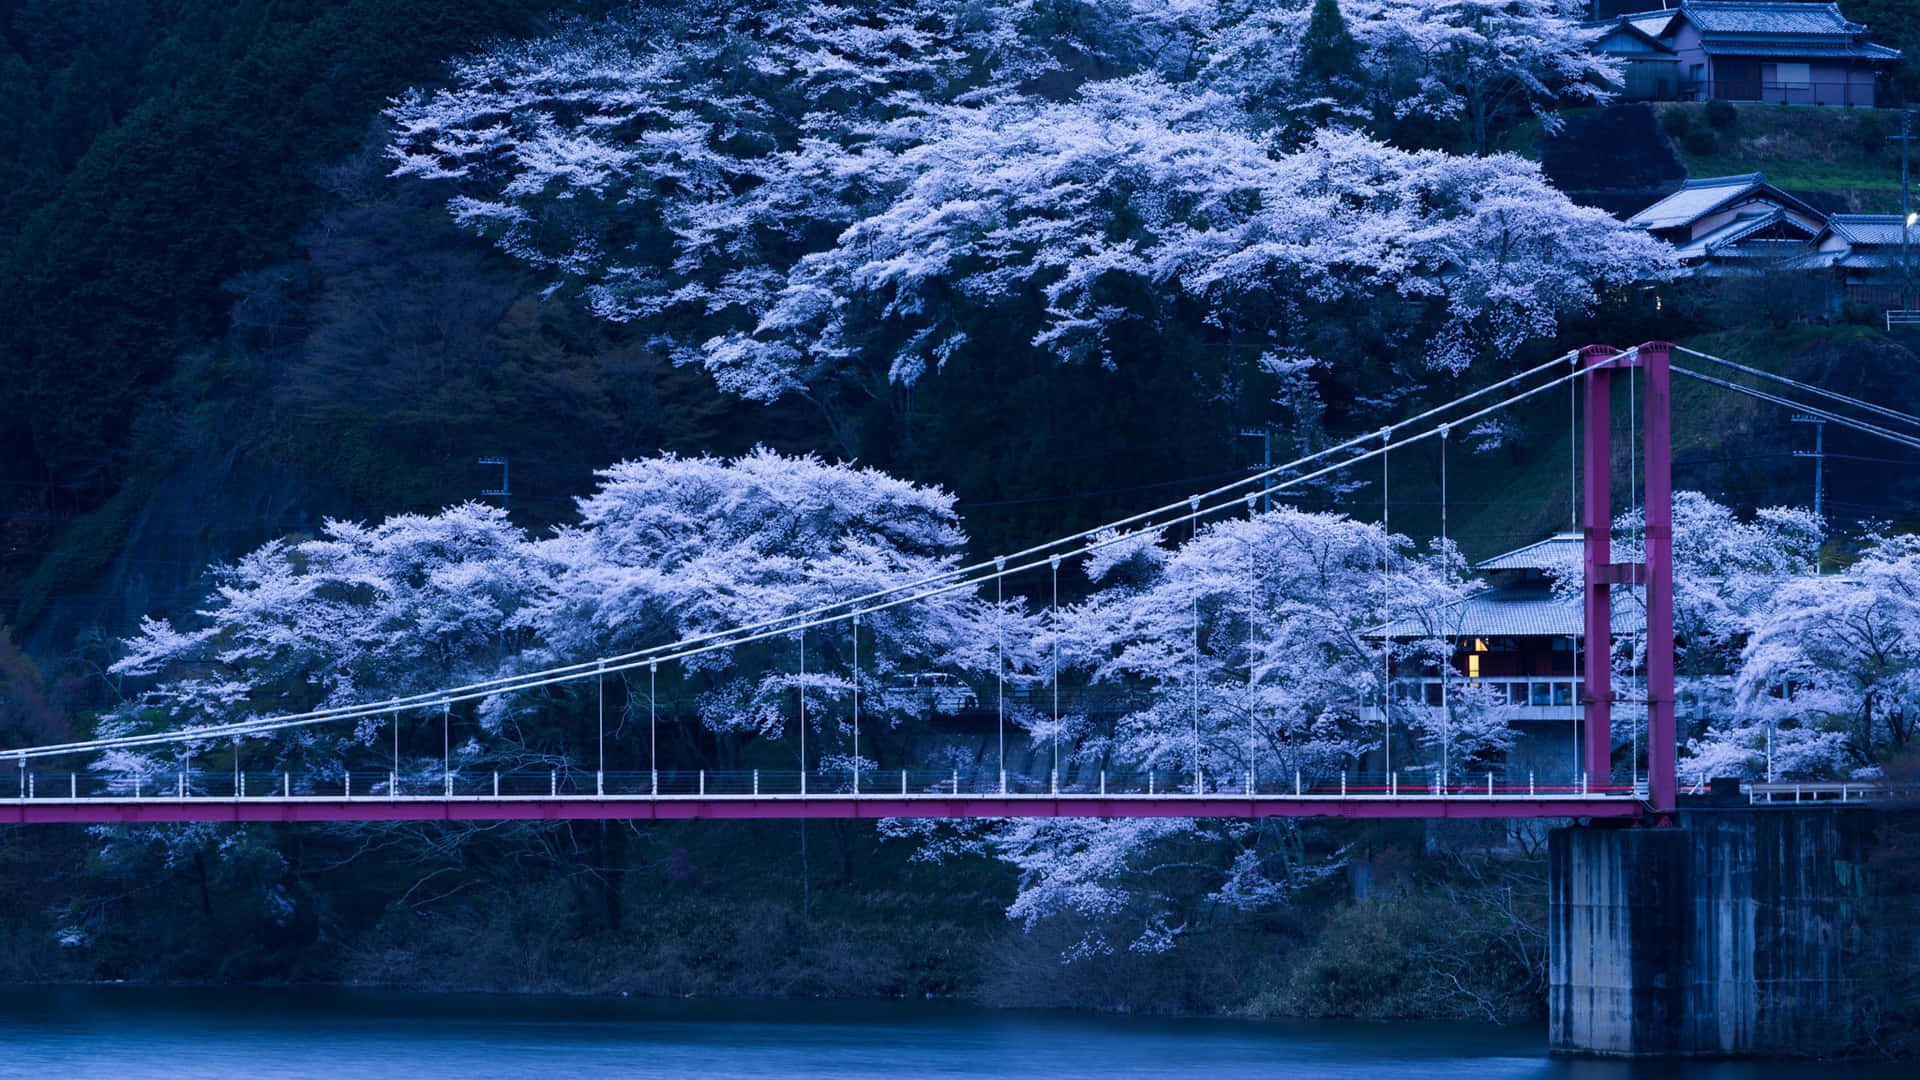 "Lovely pink sakura blossoms blooming against a tranquil dark green background."